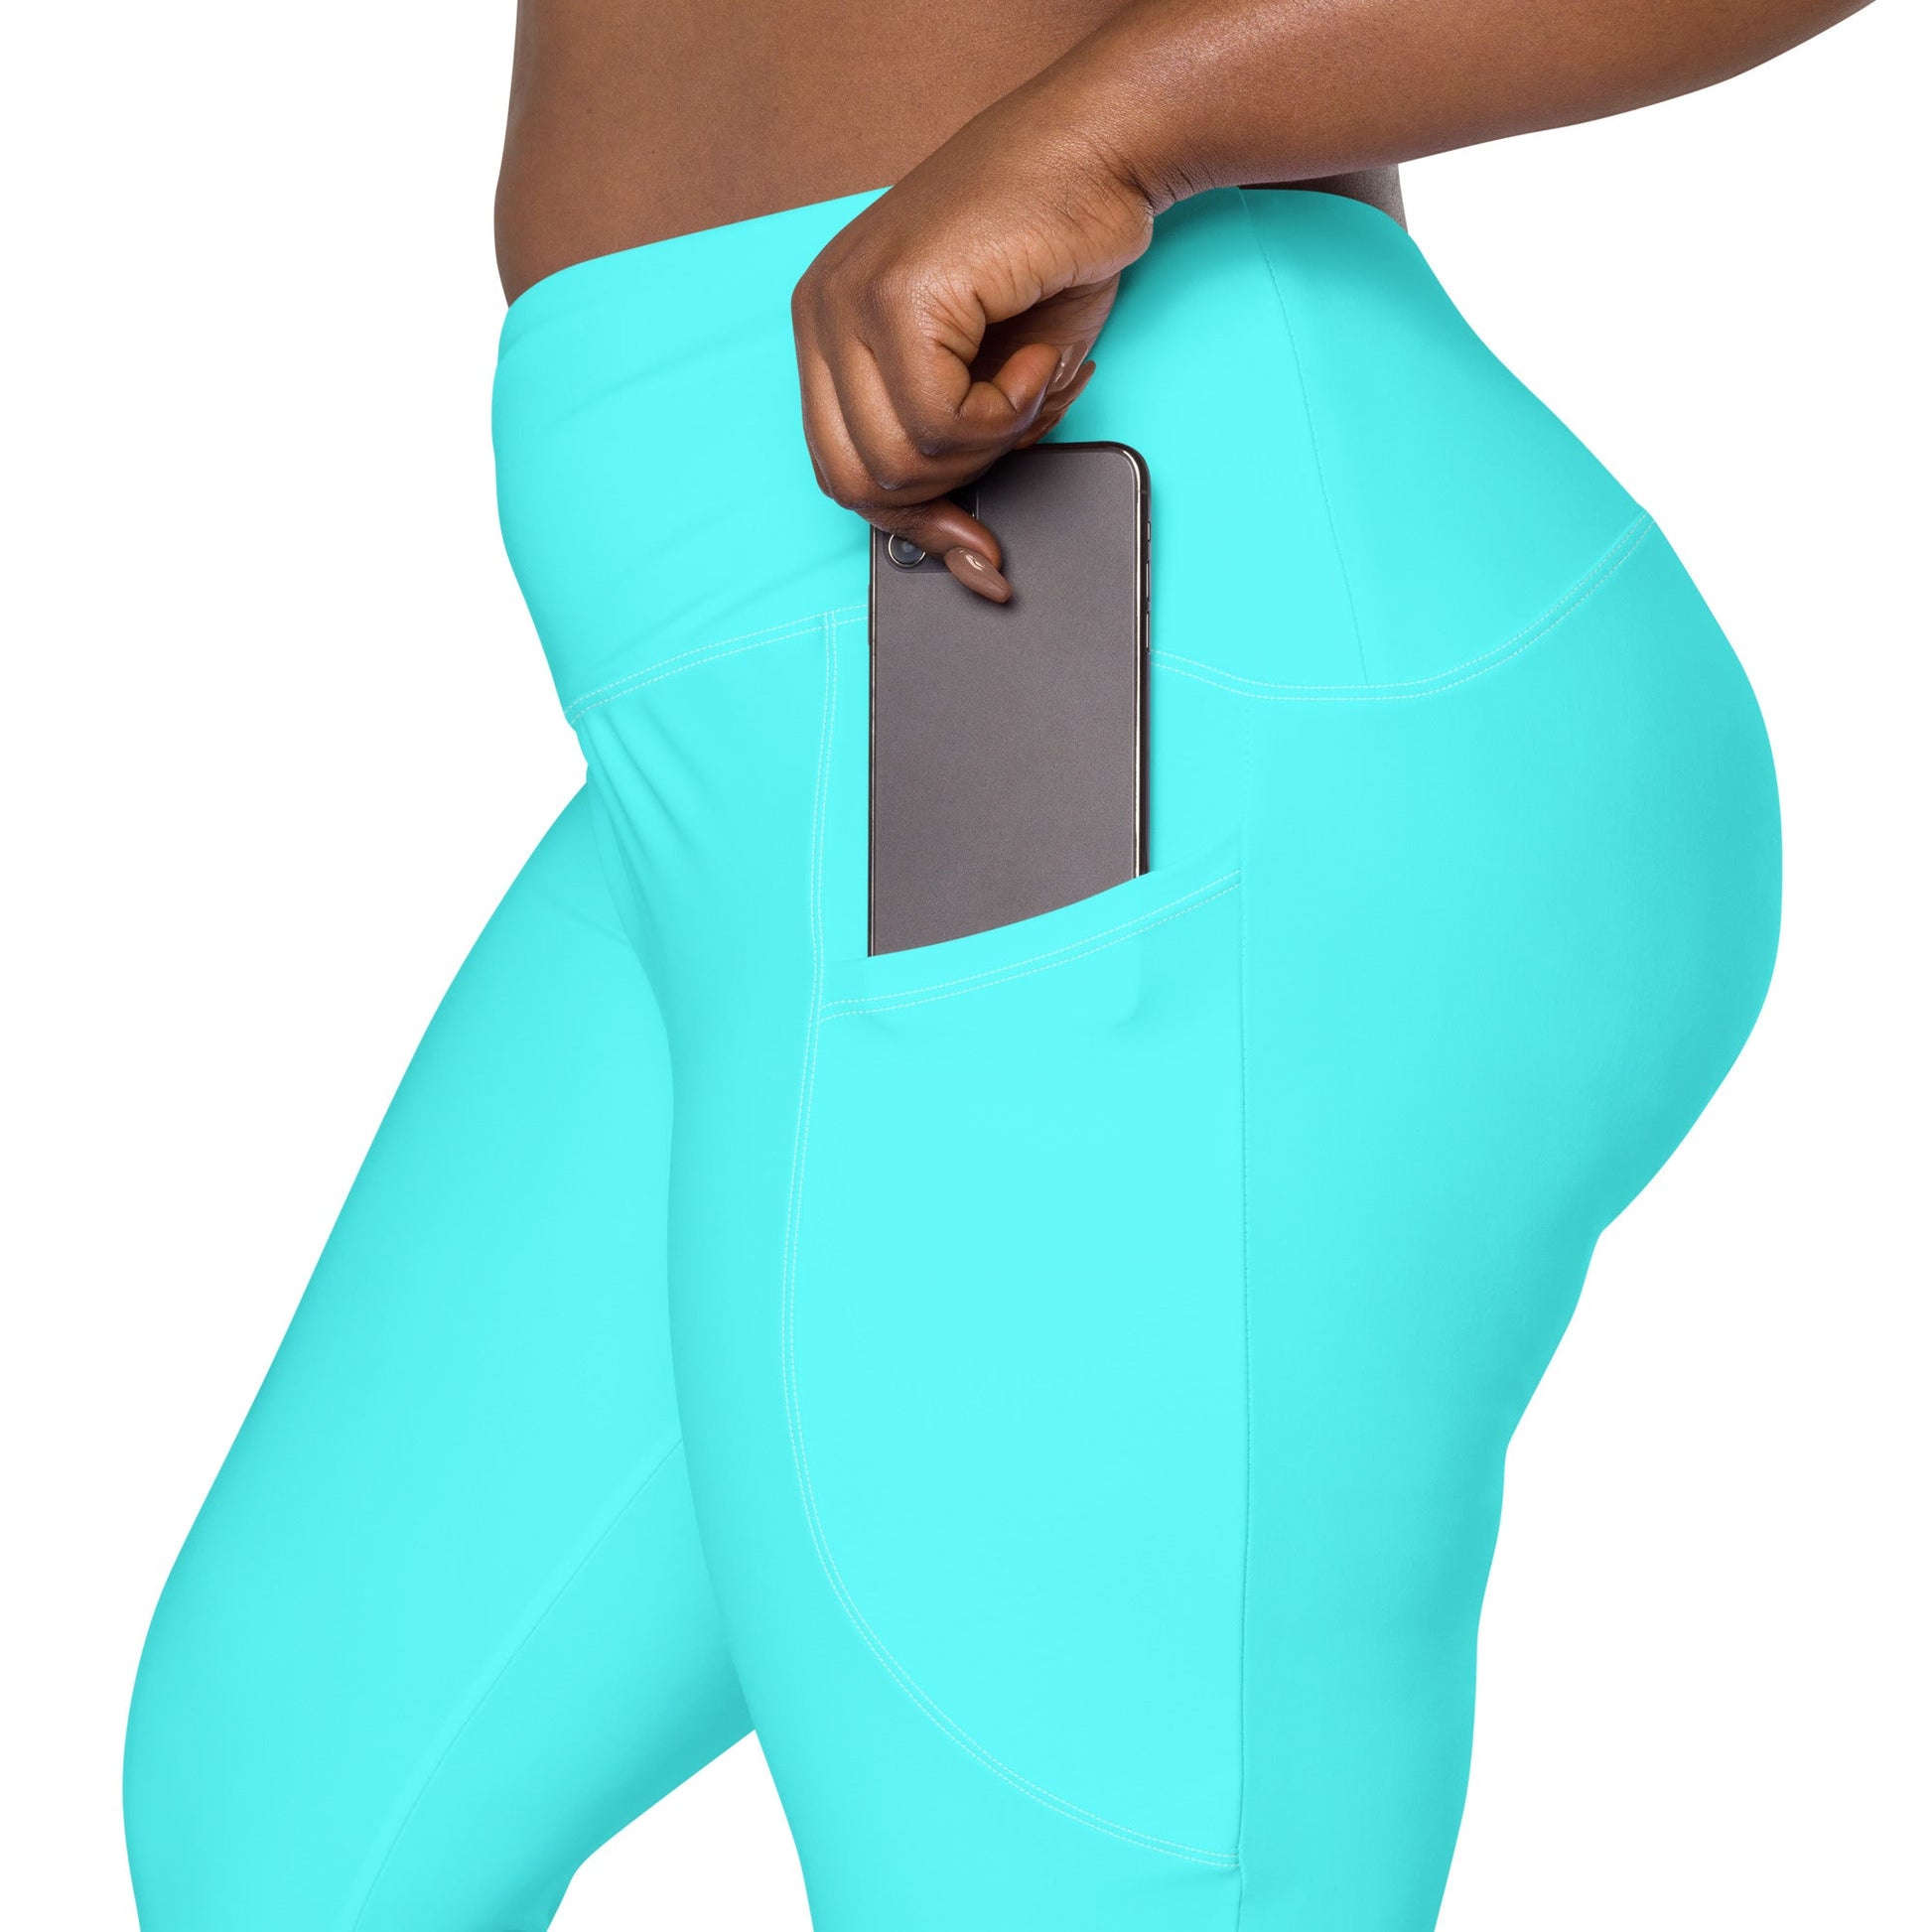 Let's go Party Leggings with pockets barbiebarbie leggingsbarbie style#tag4##tag5##tag6#